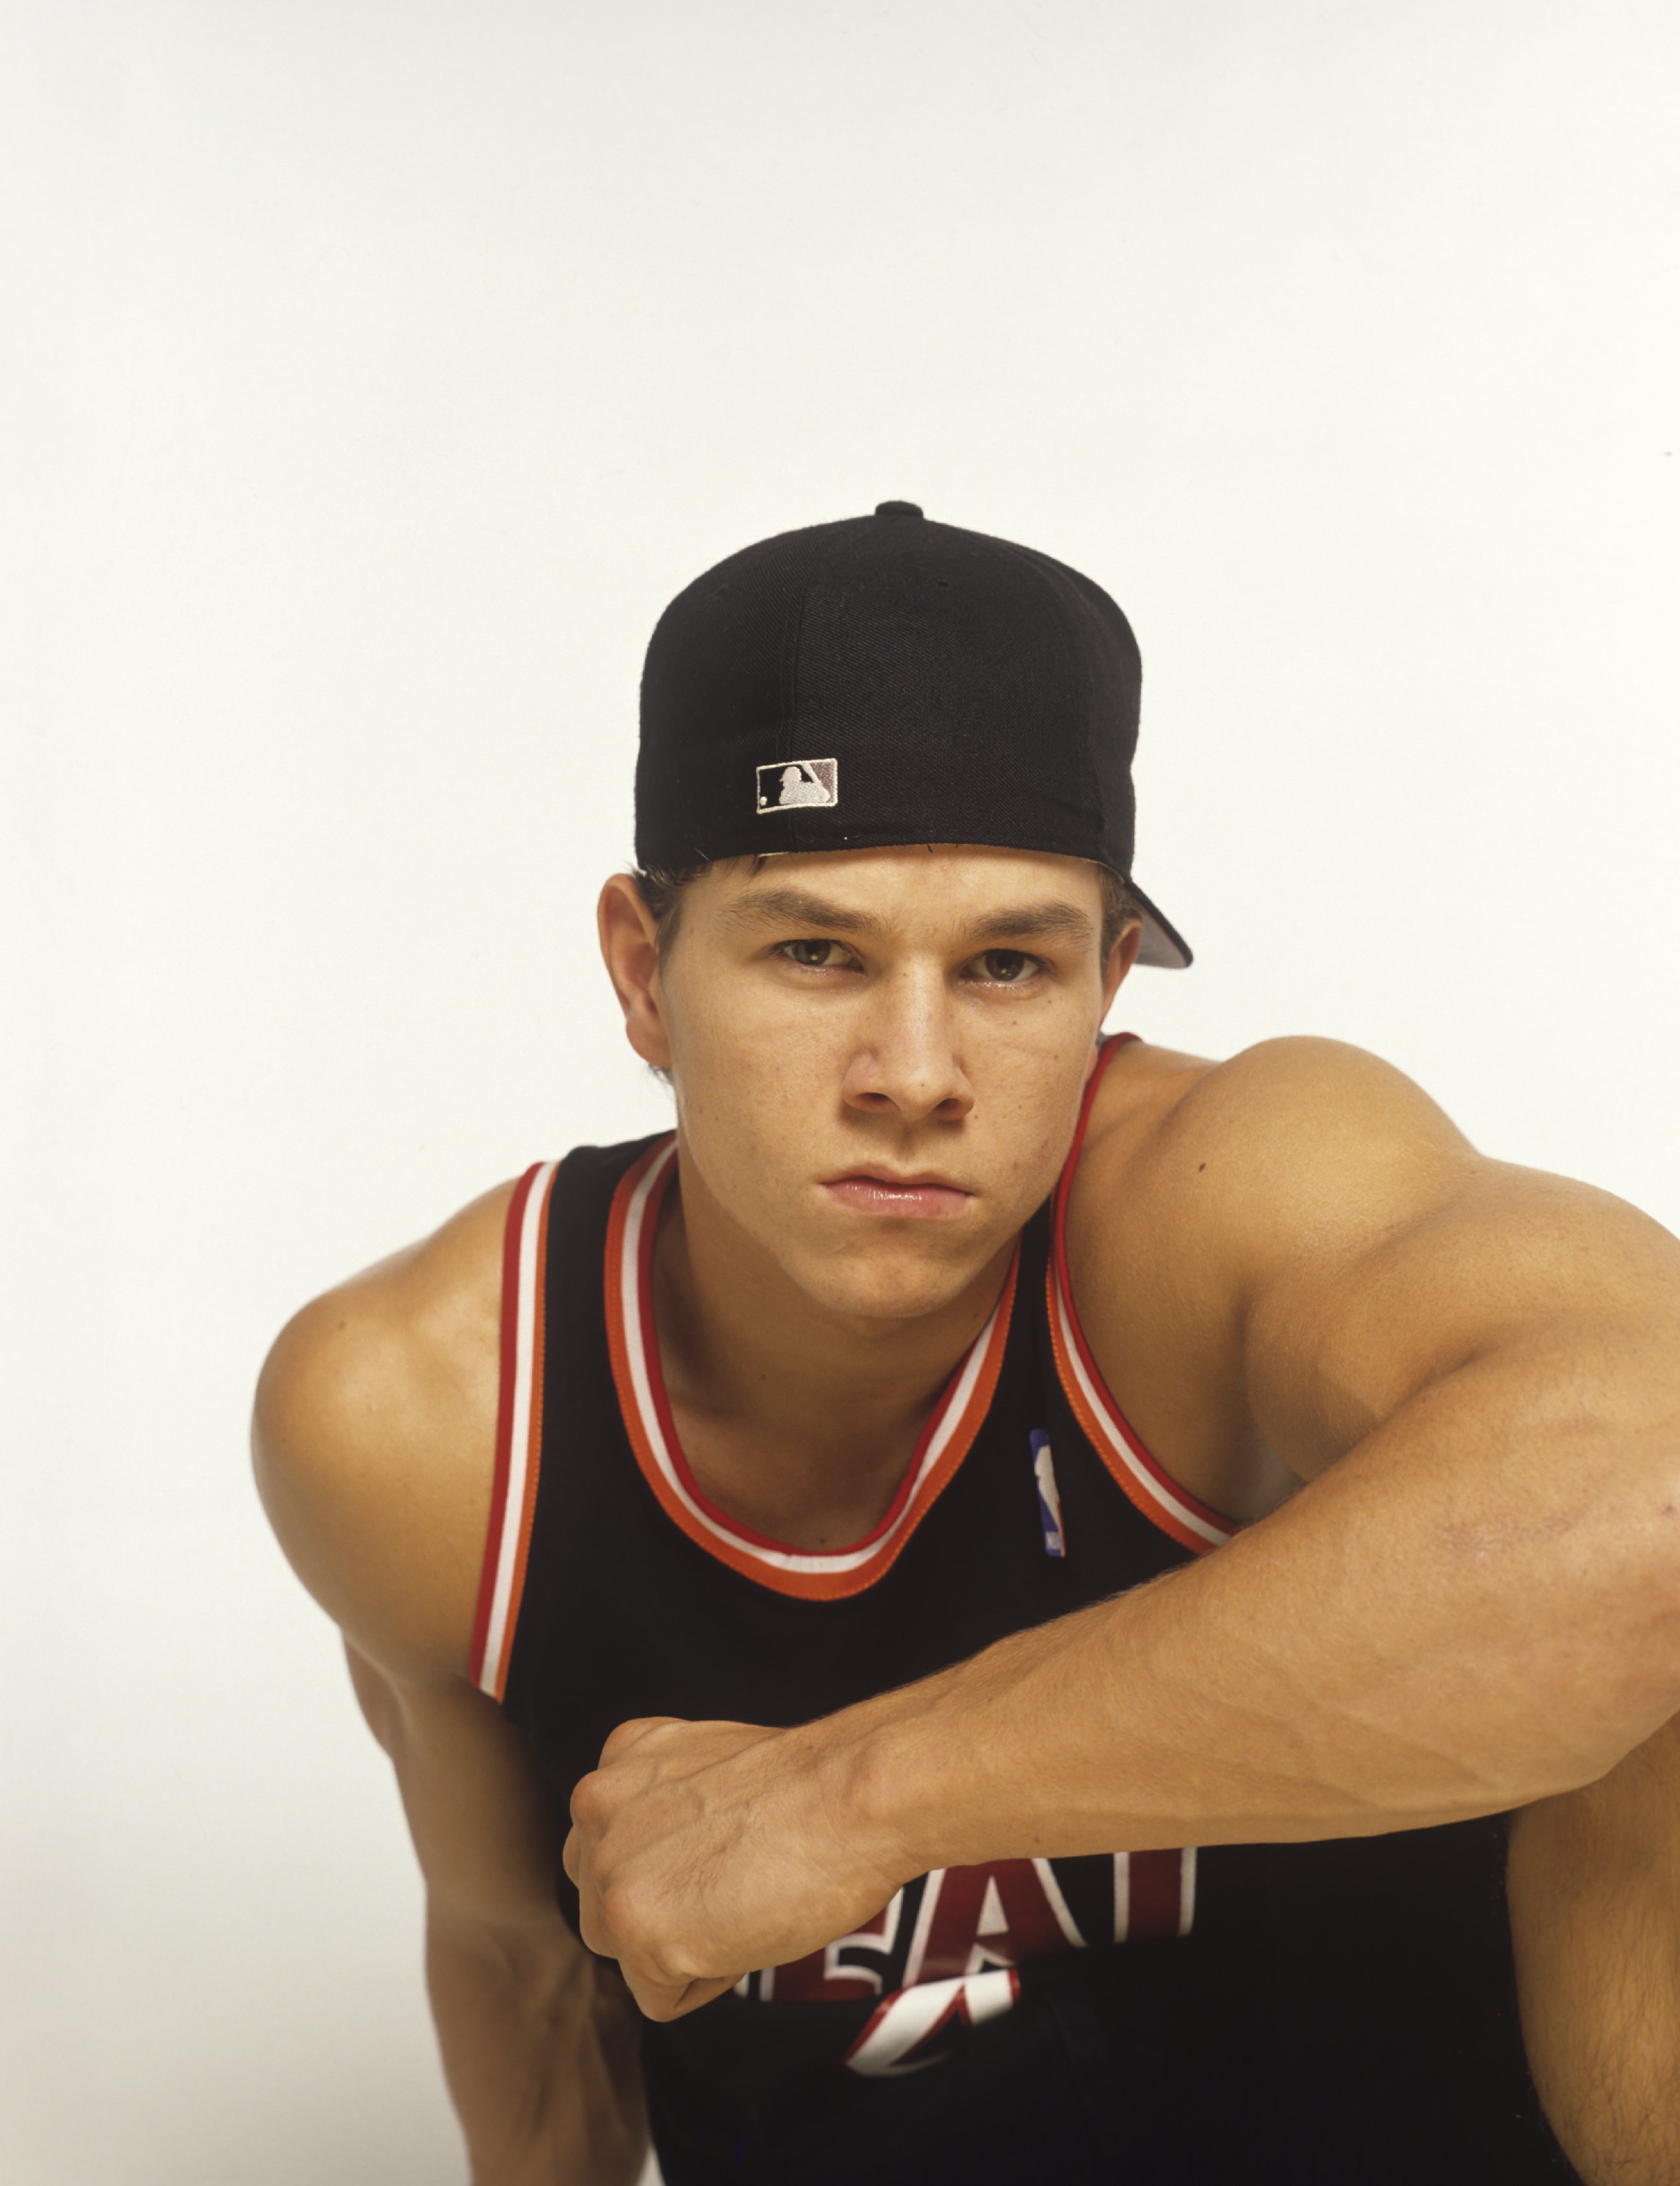 Marky Mark (Mark Wahlberg), rapper and actor, circa 1991. | Source: Getty Images